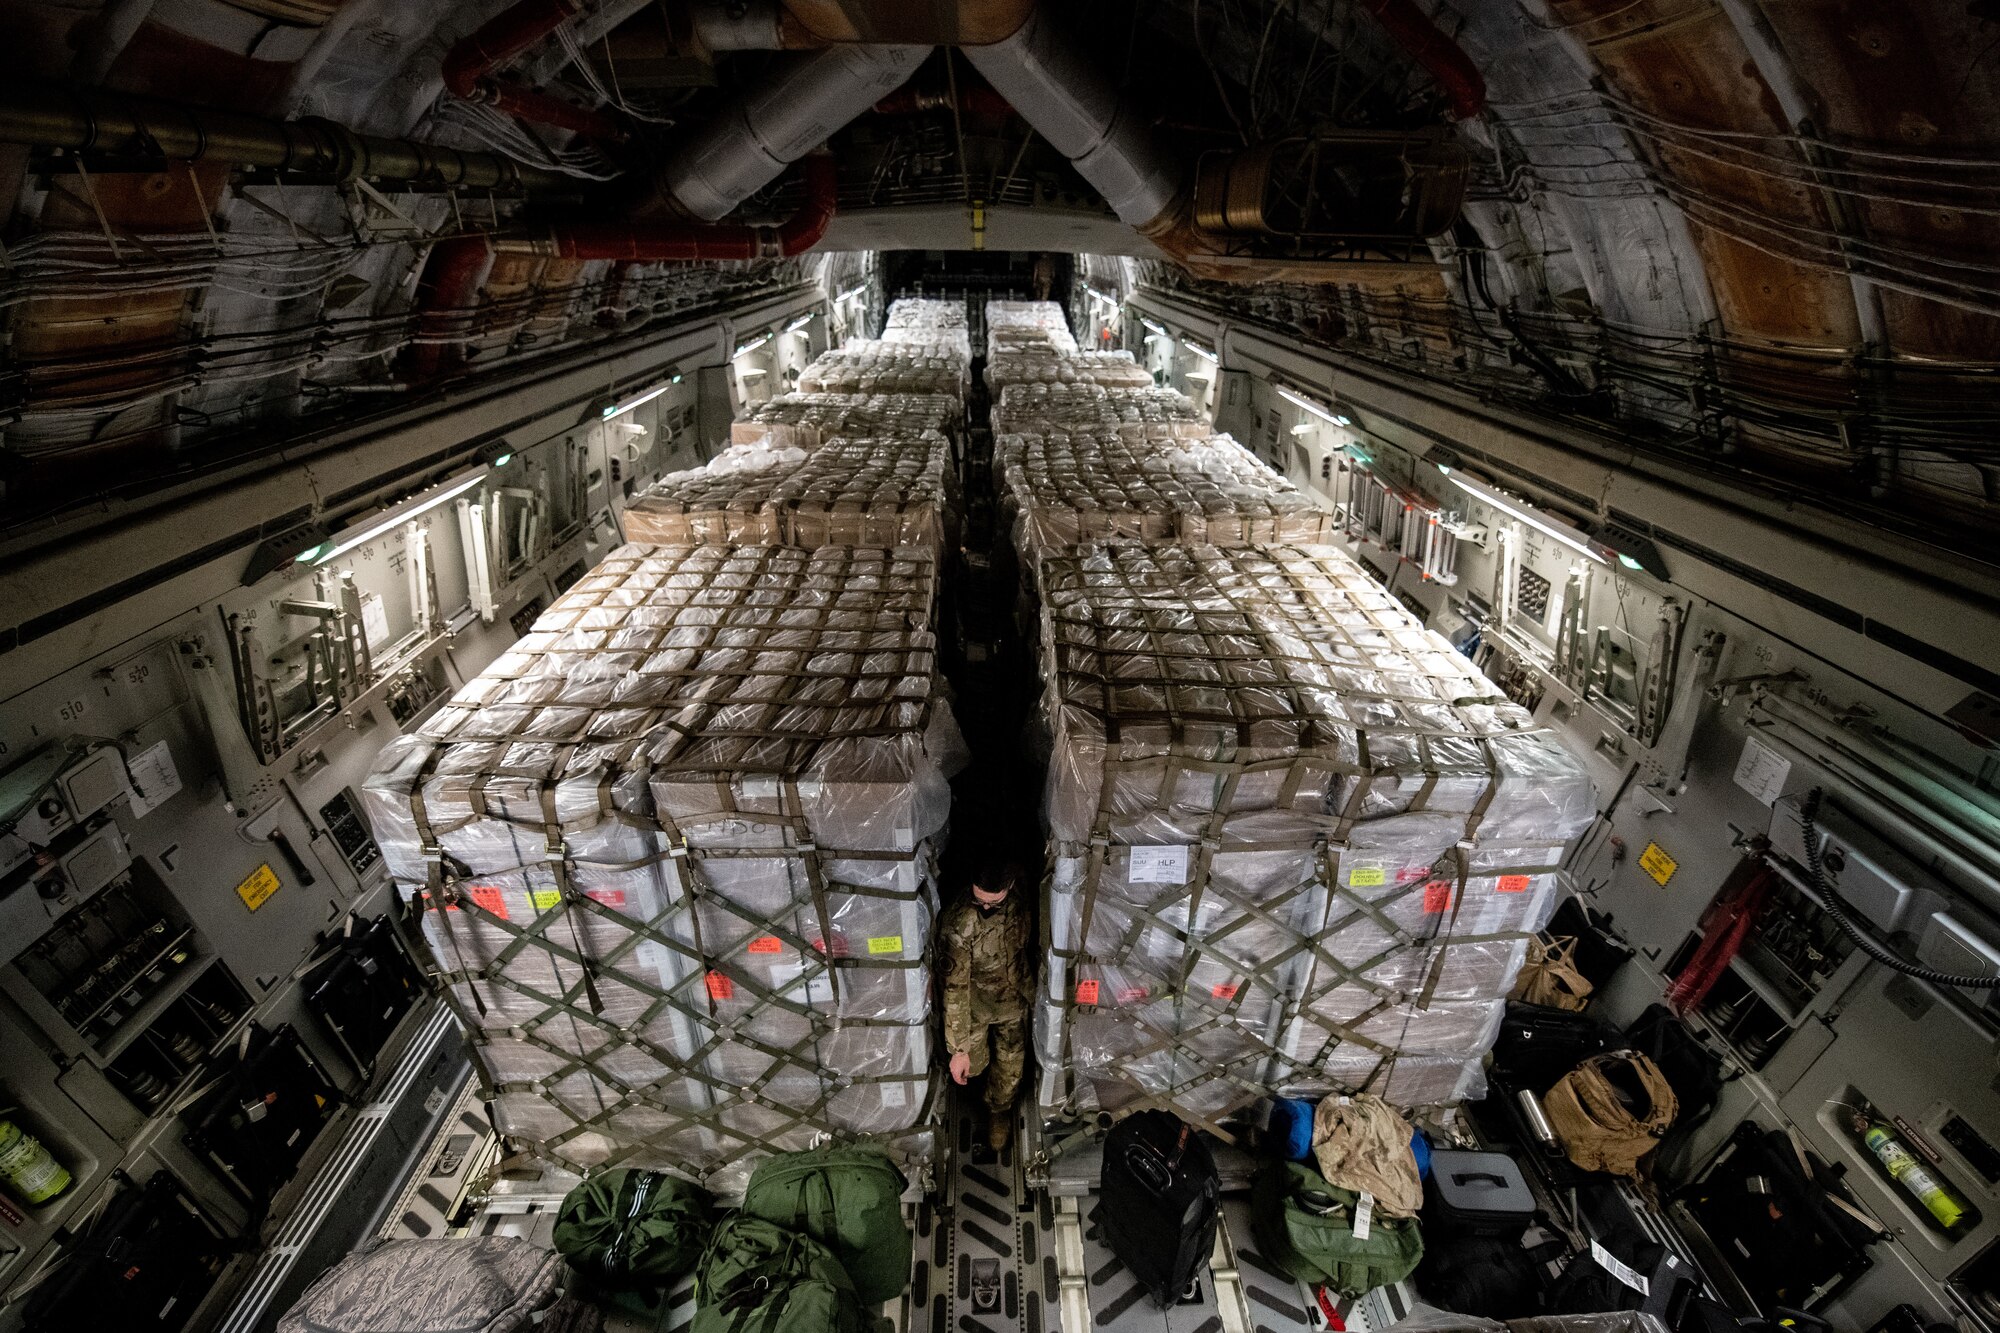 Pallets loaded into a C-17 aircraft.